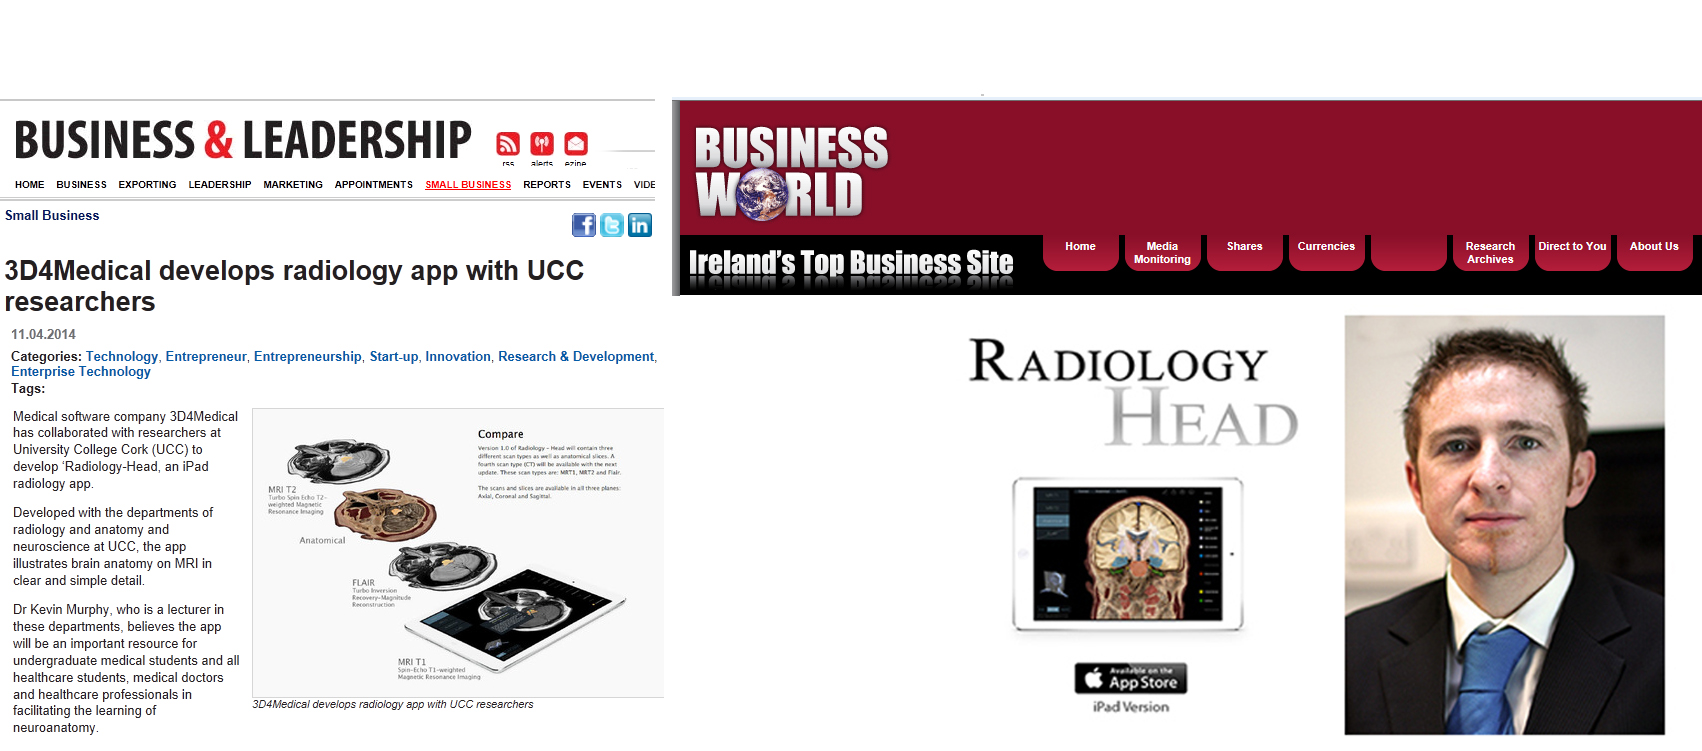 Business and Leadership & Business World feature UCC developed Radiology app